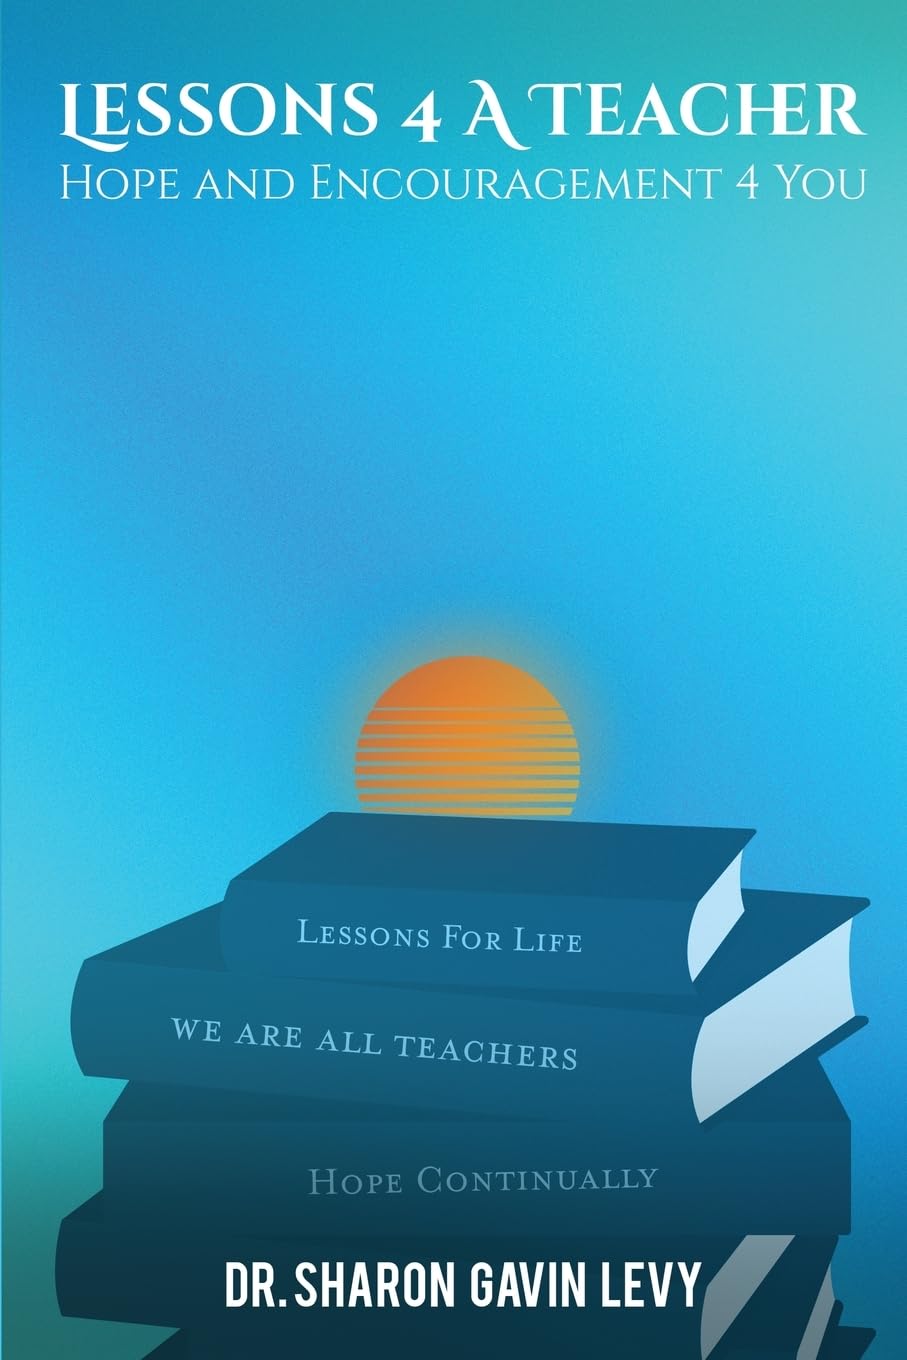 Renowned Educator Dr. Sharon Gavin Levy Releases Inspirational Book Lessons 4 a Teacher: Hope and Encouragement 4 You